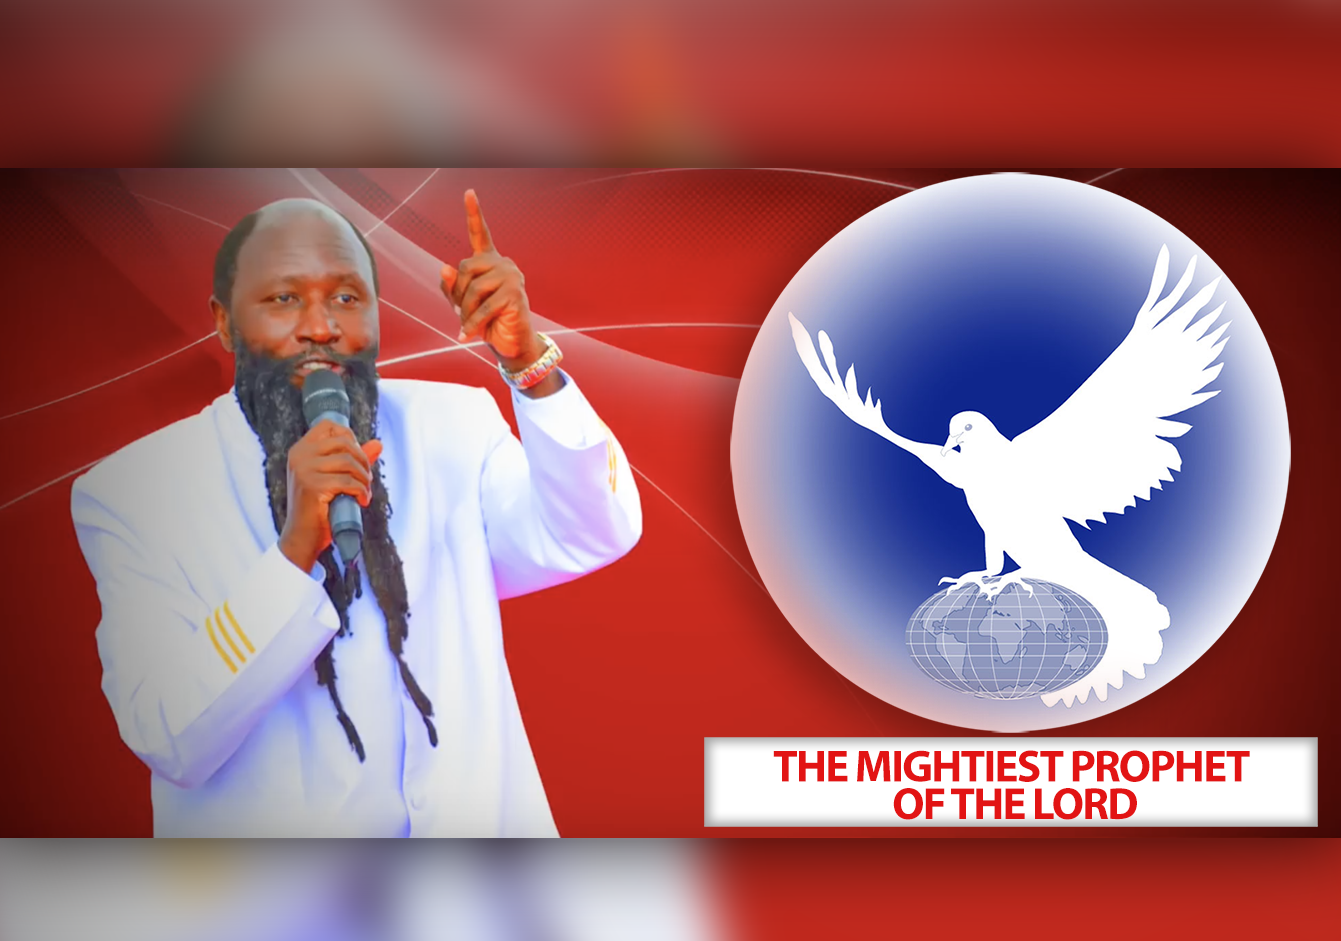 EPISODE 46 - The Mightiest Prophet Of THE LORD On What Happened Last Sunday The 19th Nov 2017 (22.11.2017) - Prophet Dr. Owuor